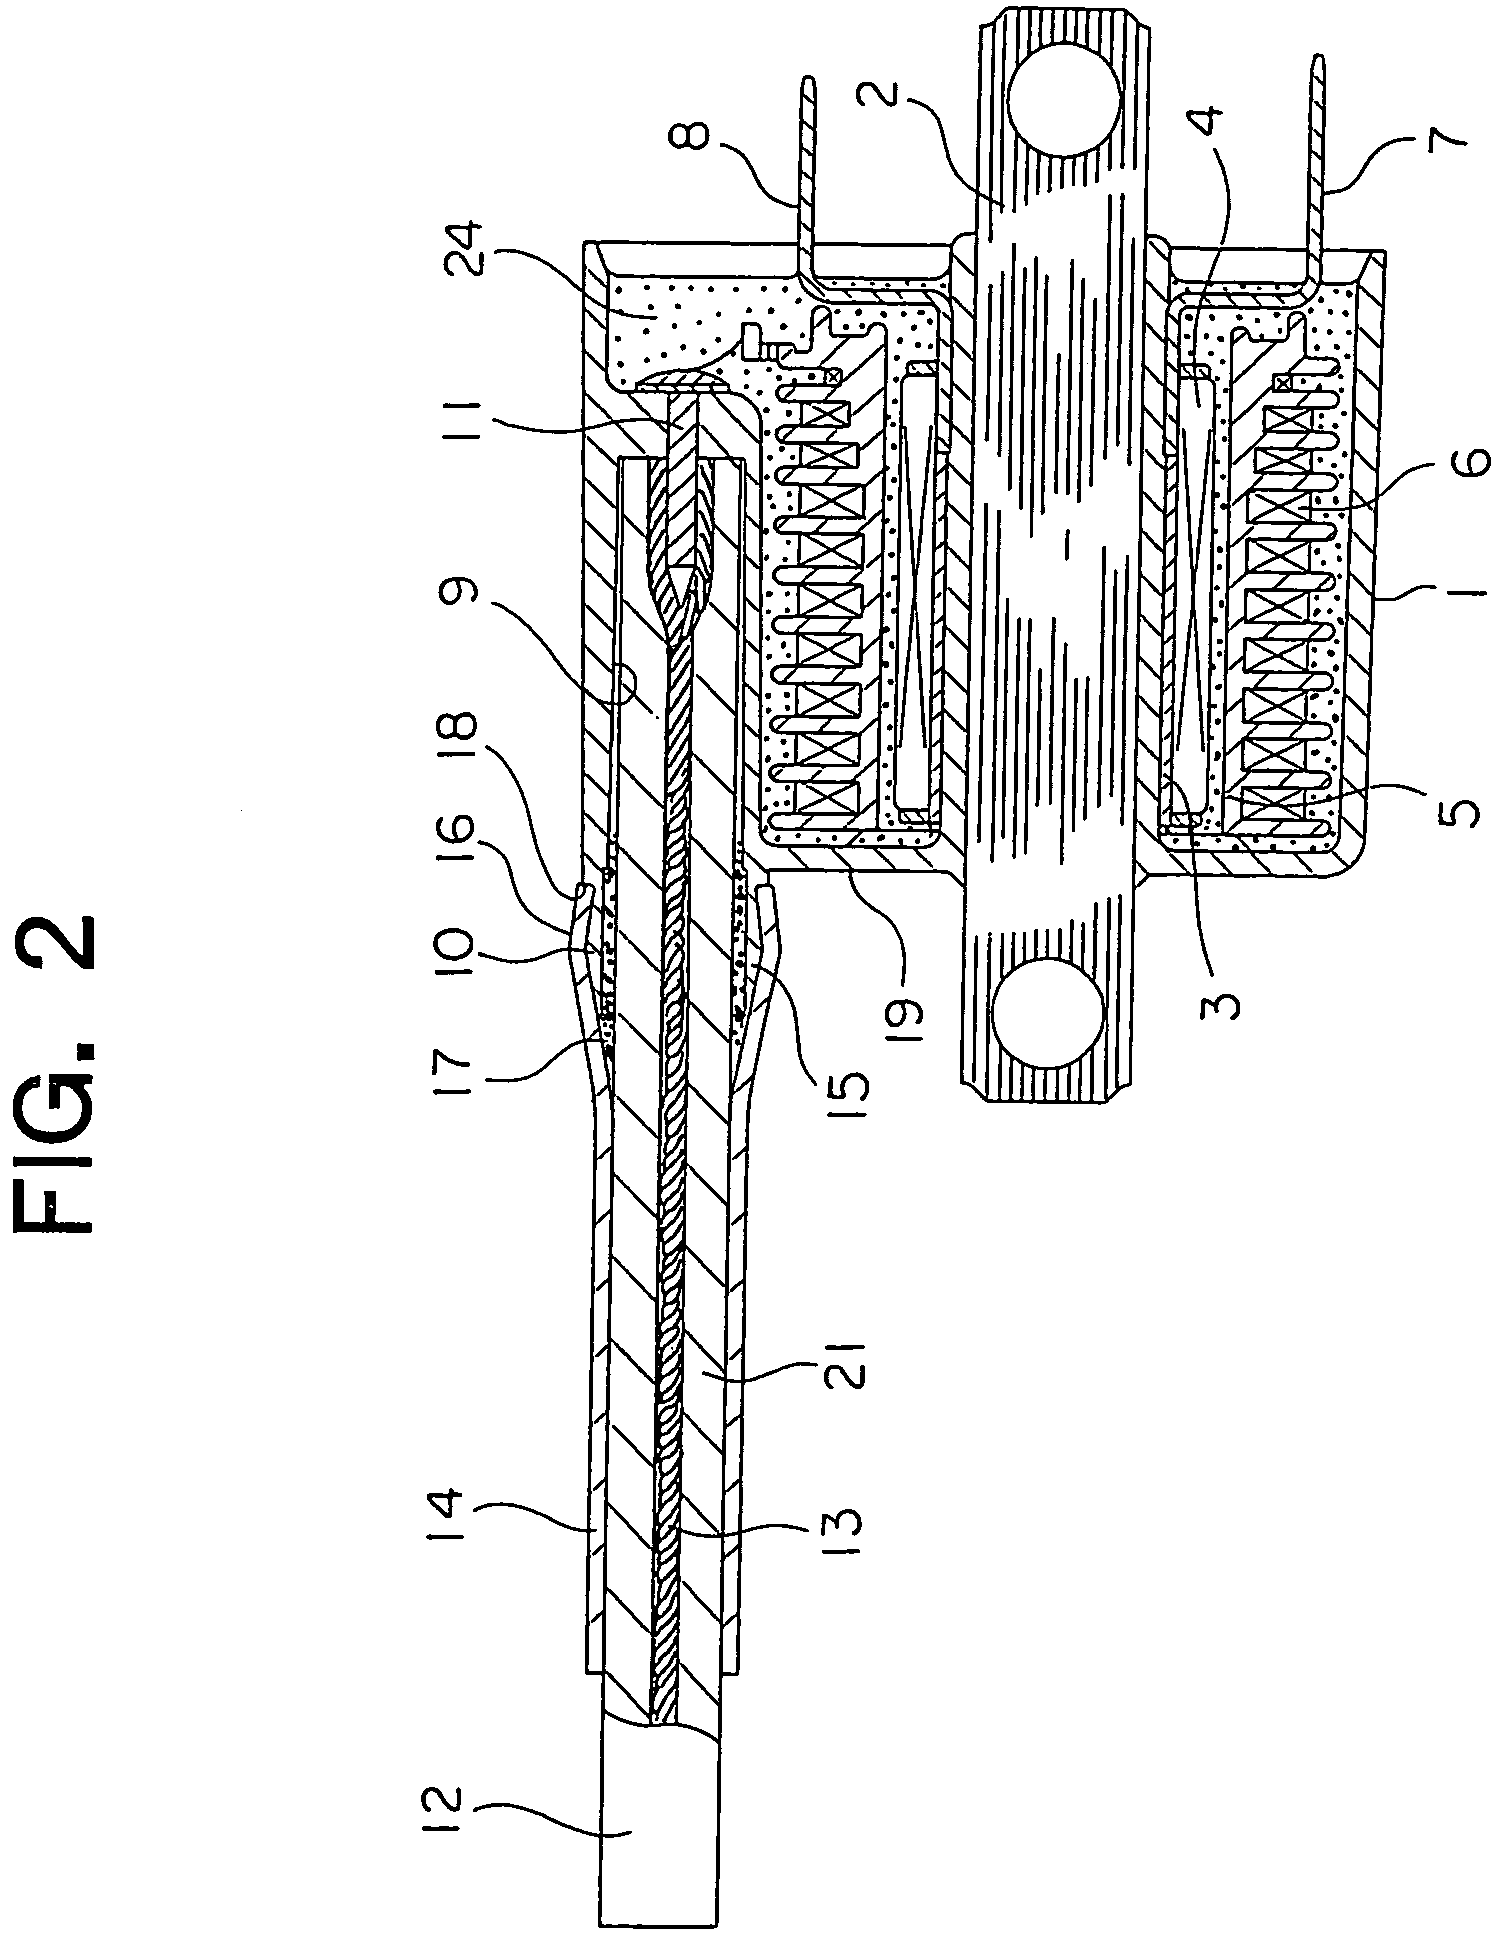 Internal combustion engine ignition coil apparatus